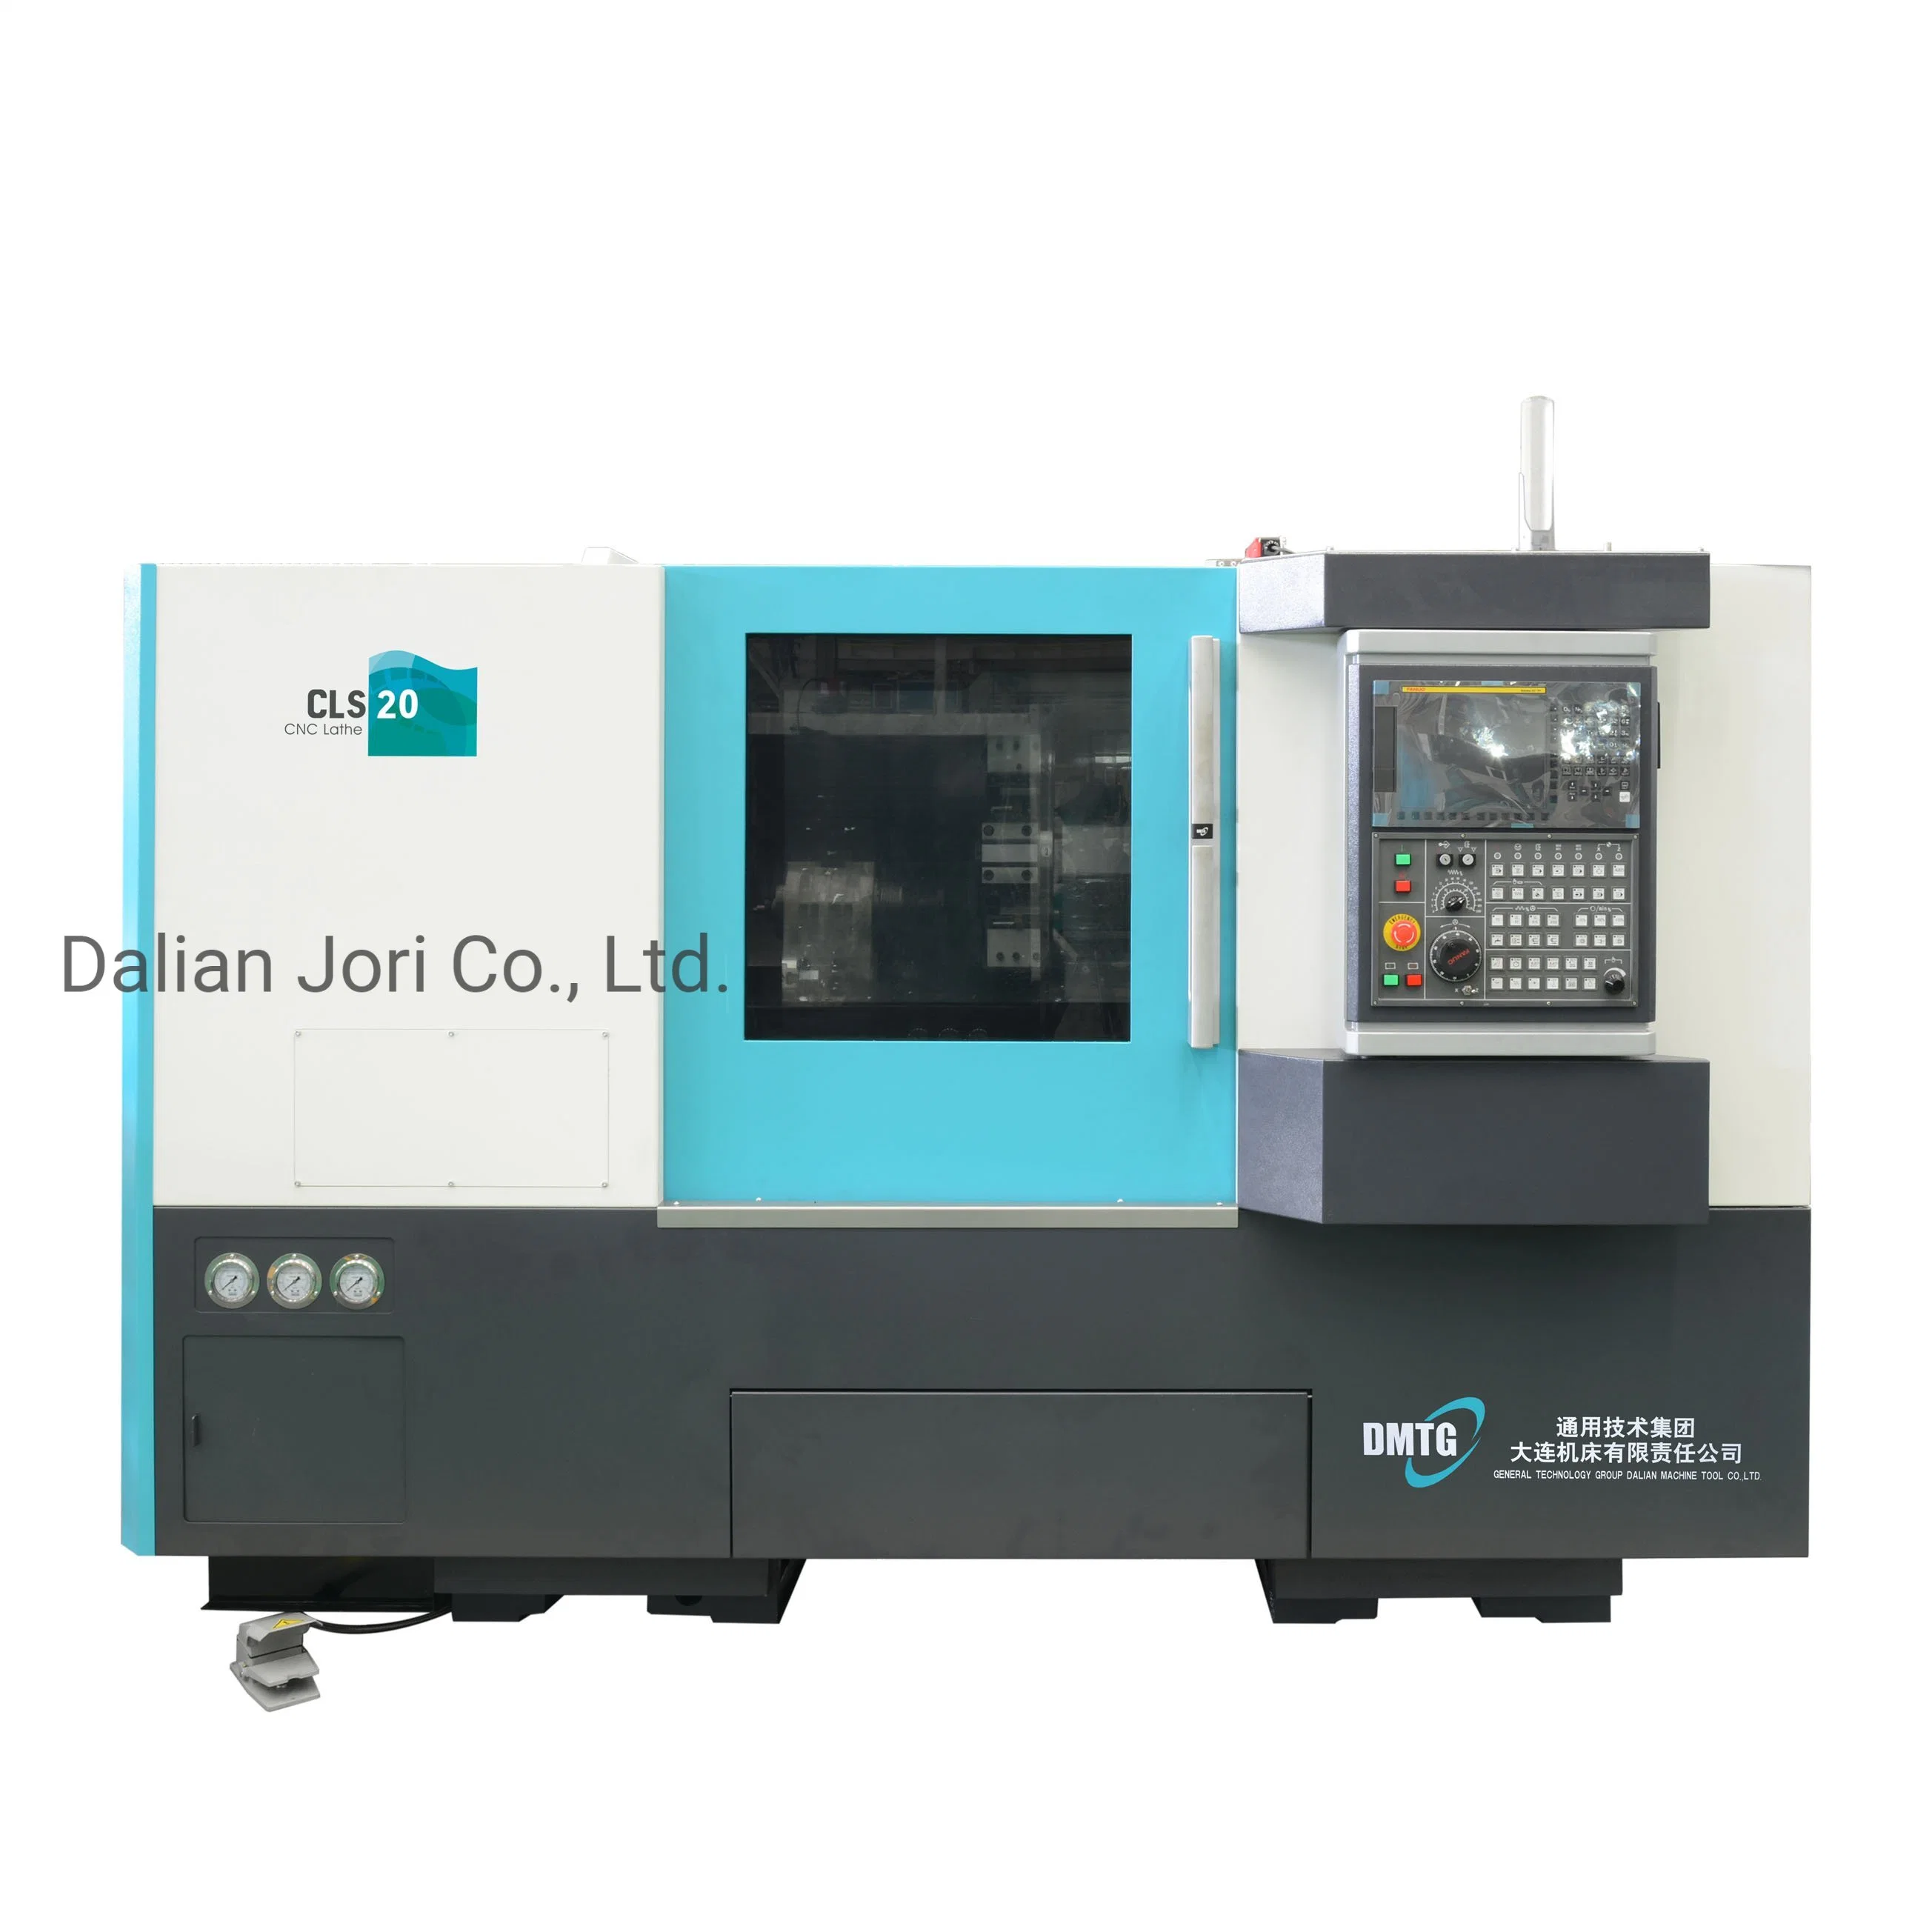 Dmtg Slant Bed CNC Turning Lathe Machine Tools with Driven Tool Turret Cl-S20 5 Axis Turning Center Torno CNC Machine